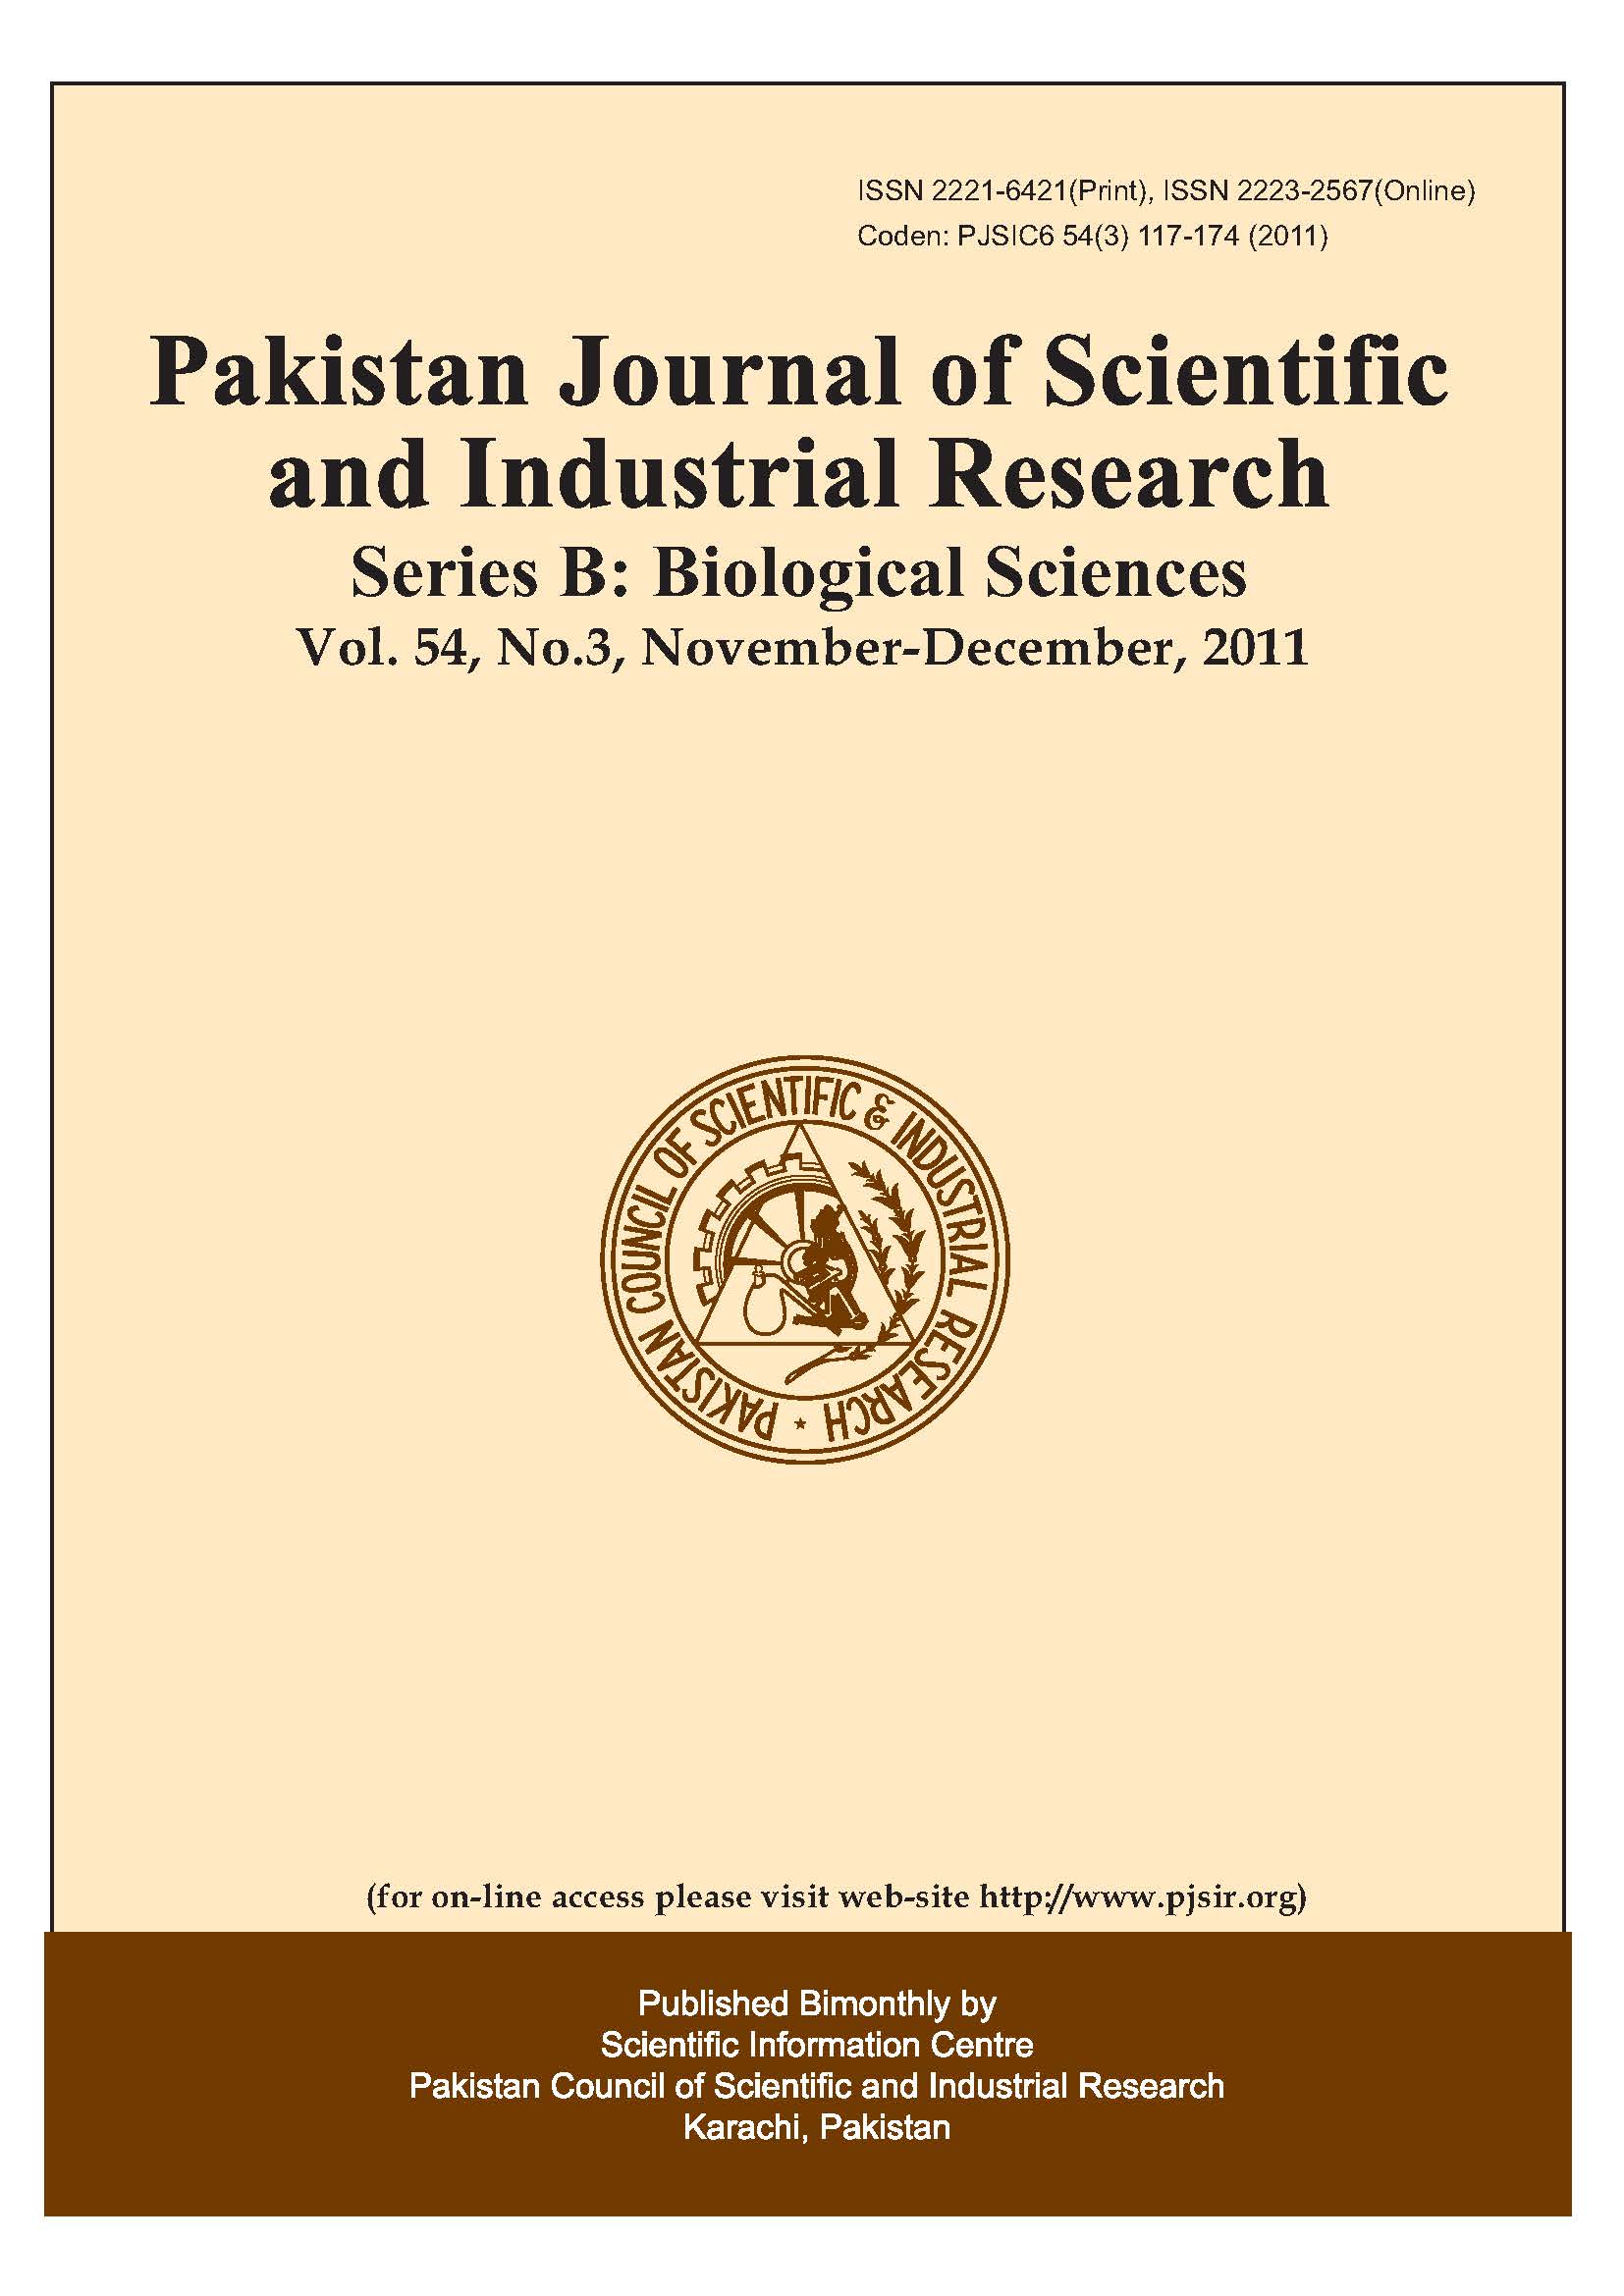 					View Vol. 54 No. 3 (2011): Pakistan Journal of Scientific and Industrial Research Series B: Biological Sciences
				